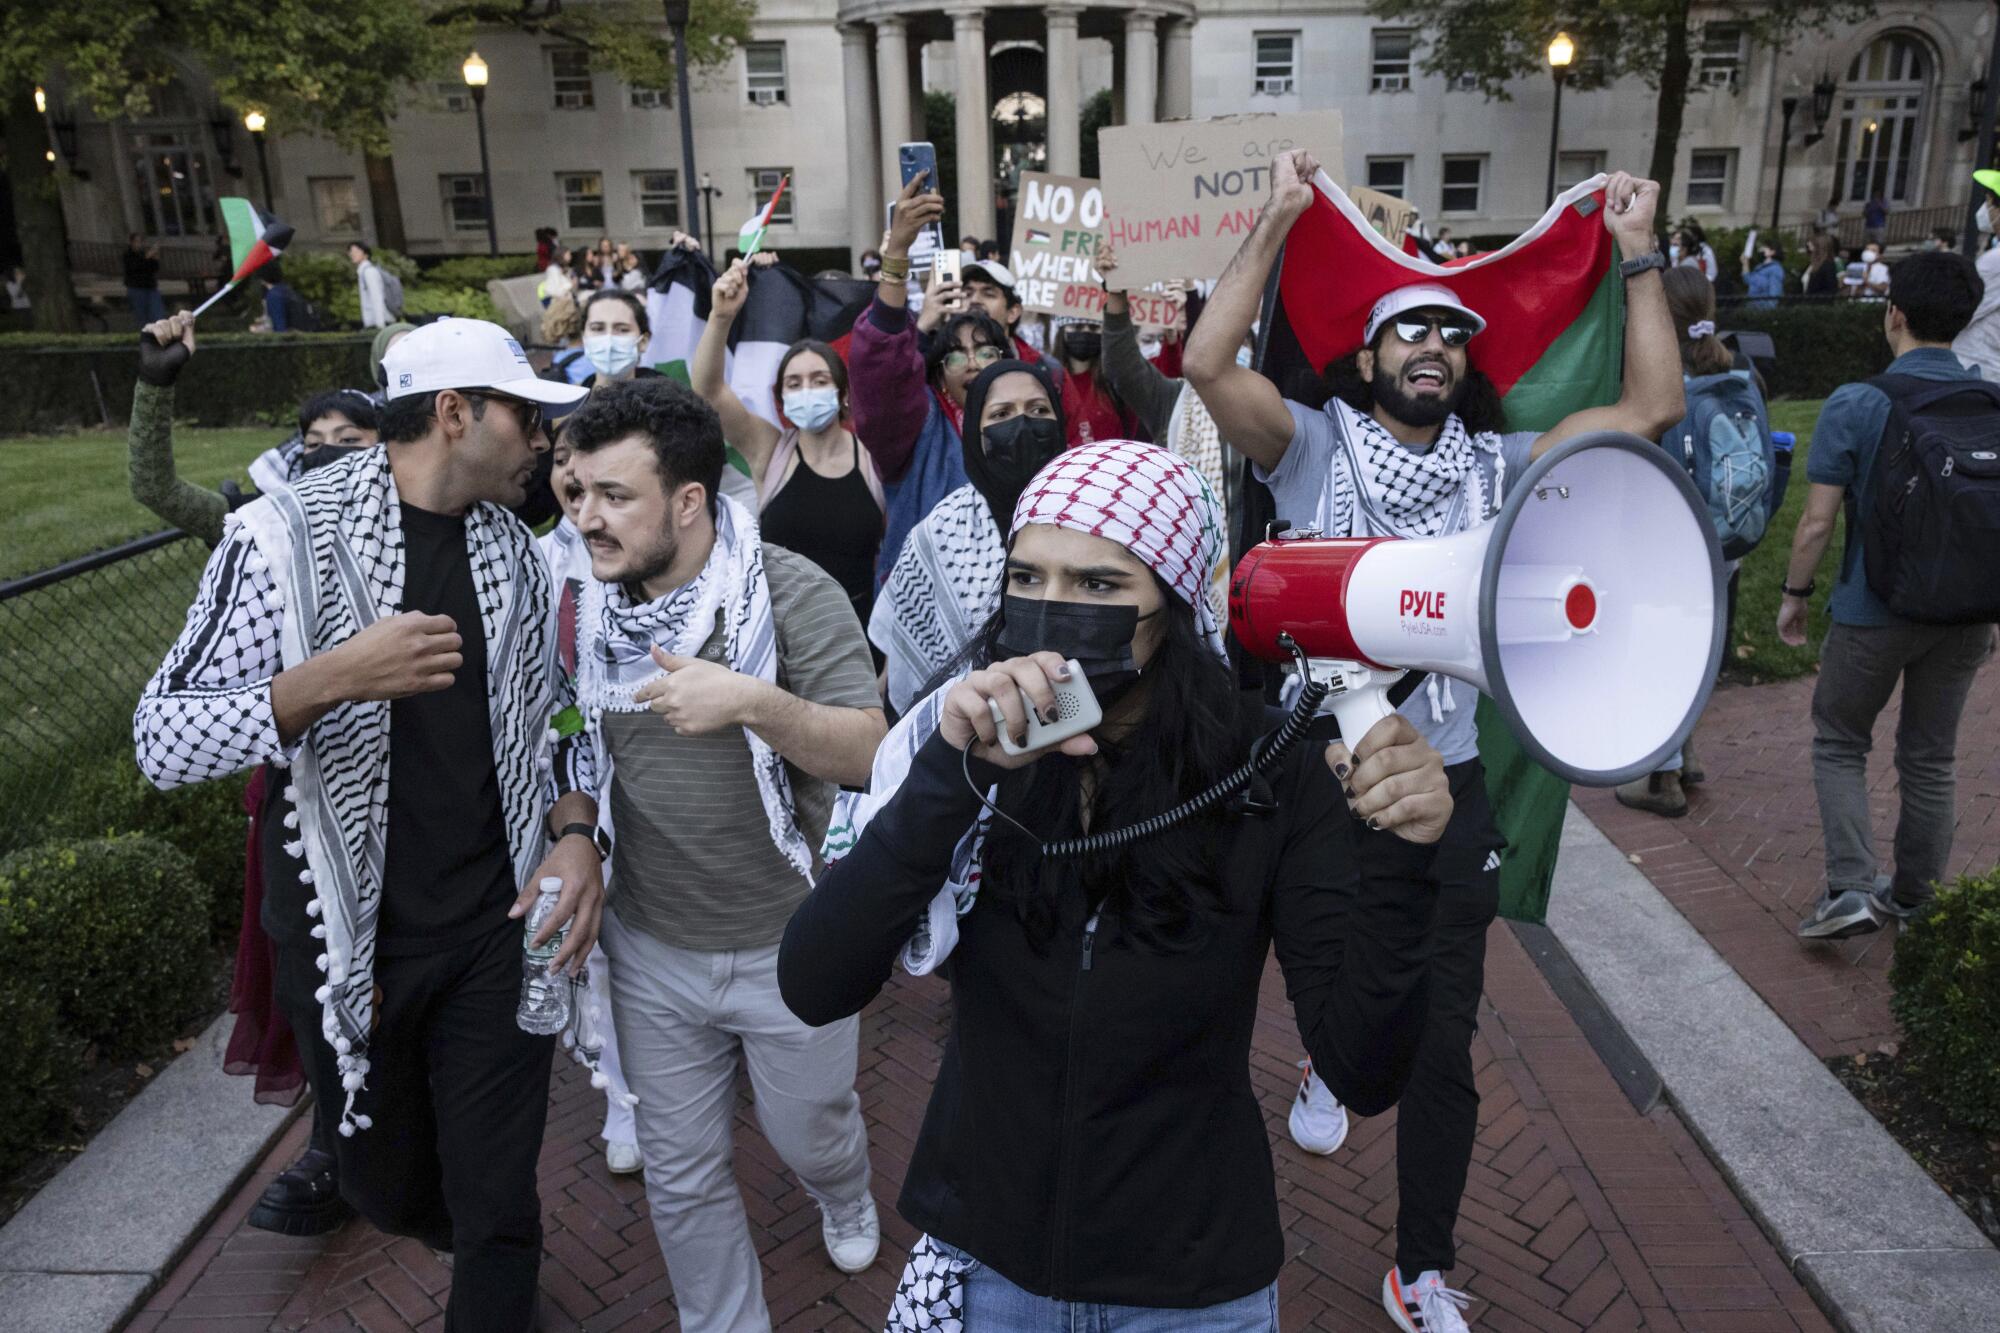 A person with a megaphone walks with a group of demonstrators on a college campus